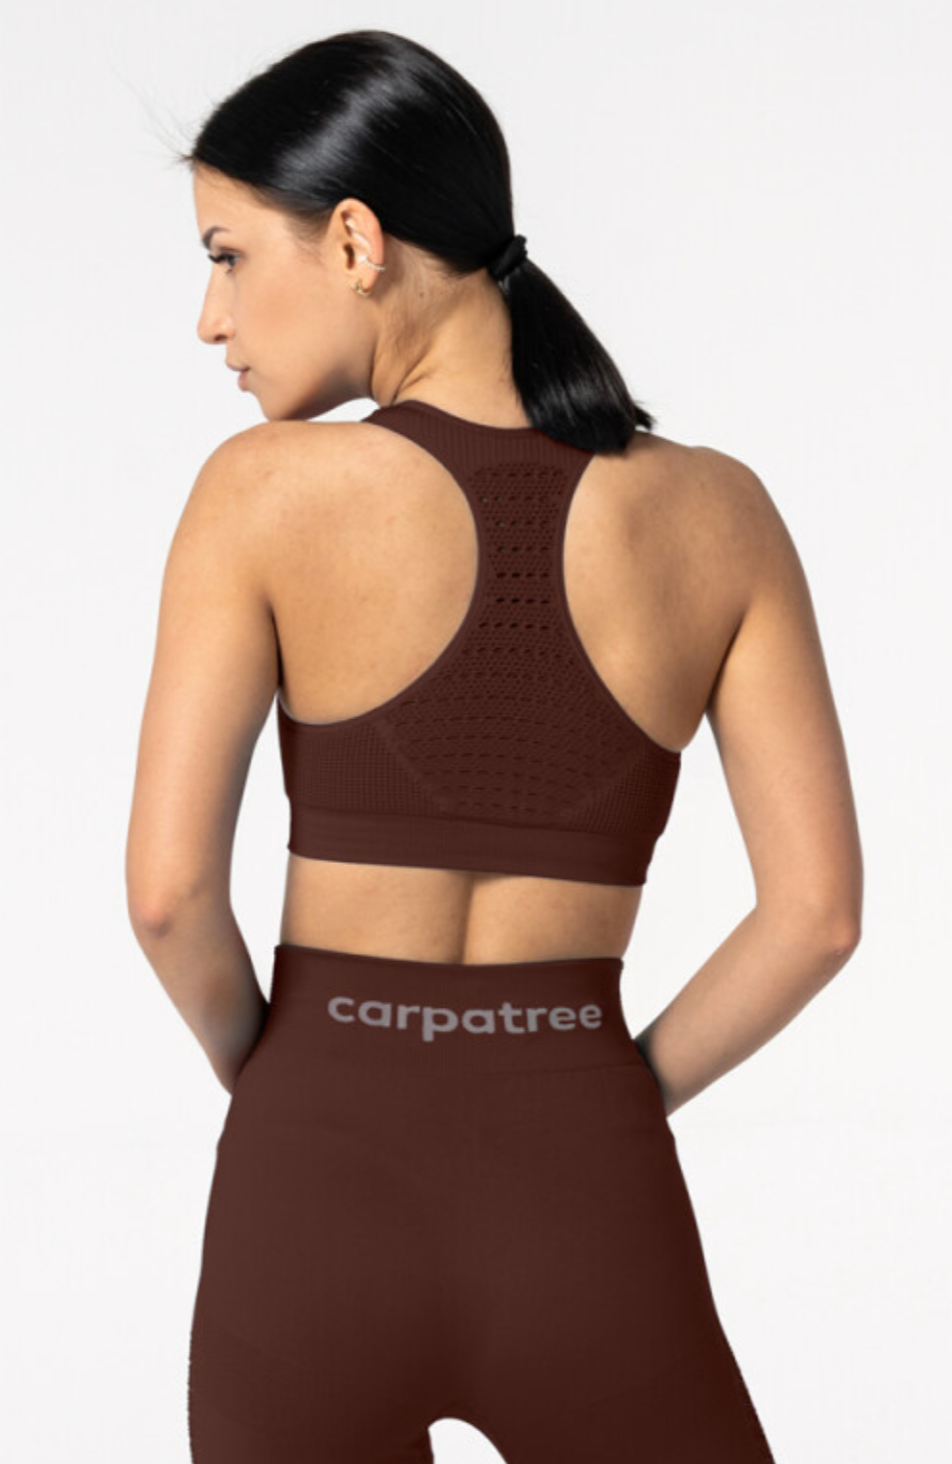 Carpatree Phase Seamless Bra - Burgundy seamless sports bra with removable padding and razor back with crochet style detail.